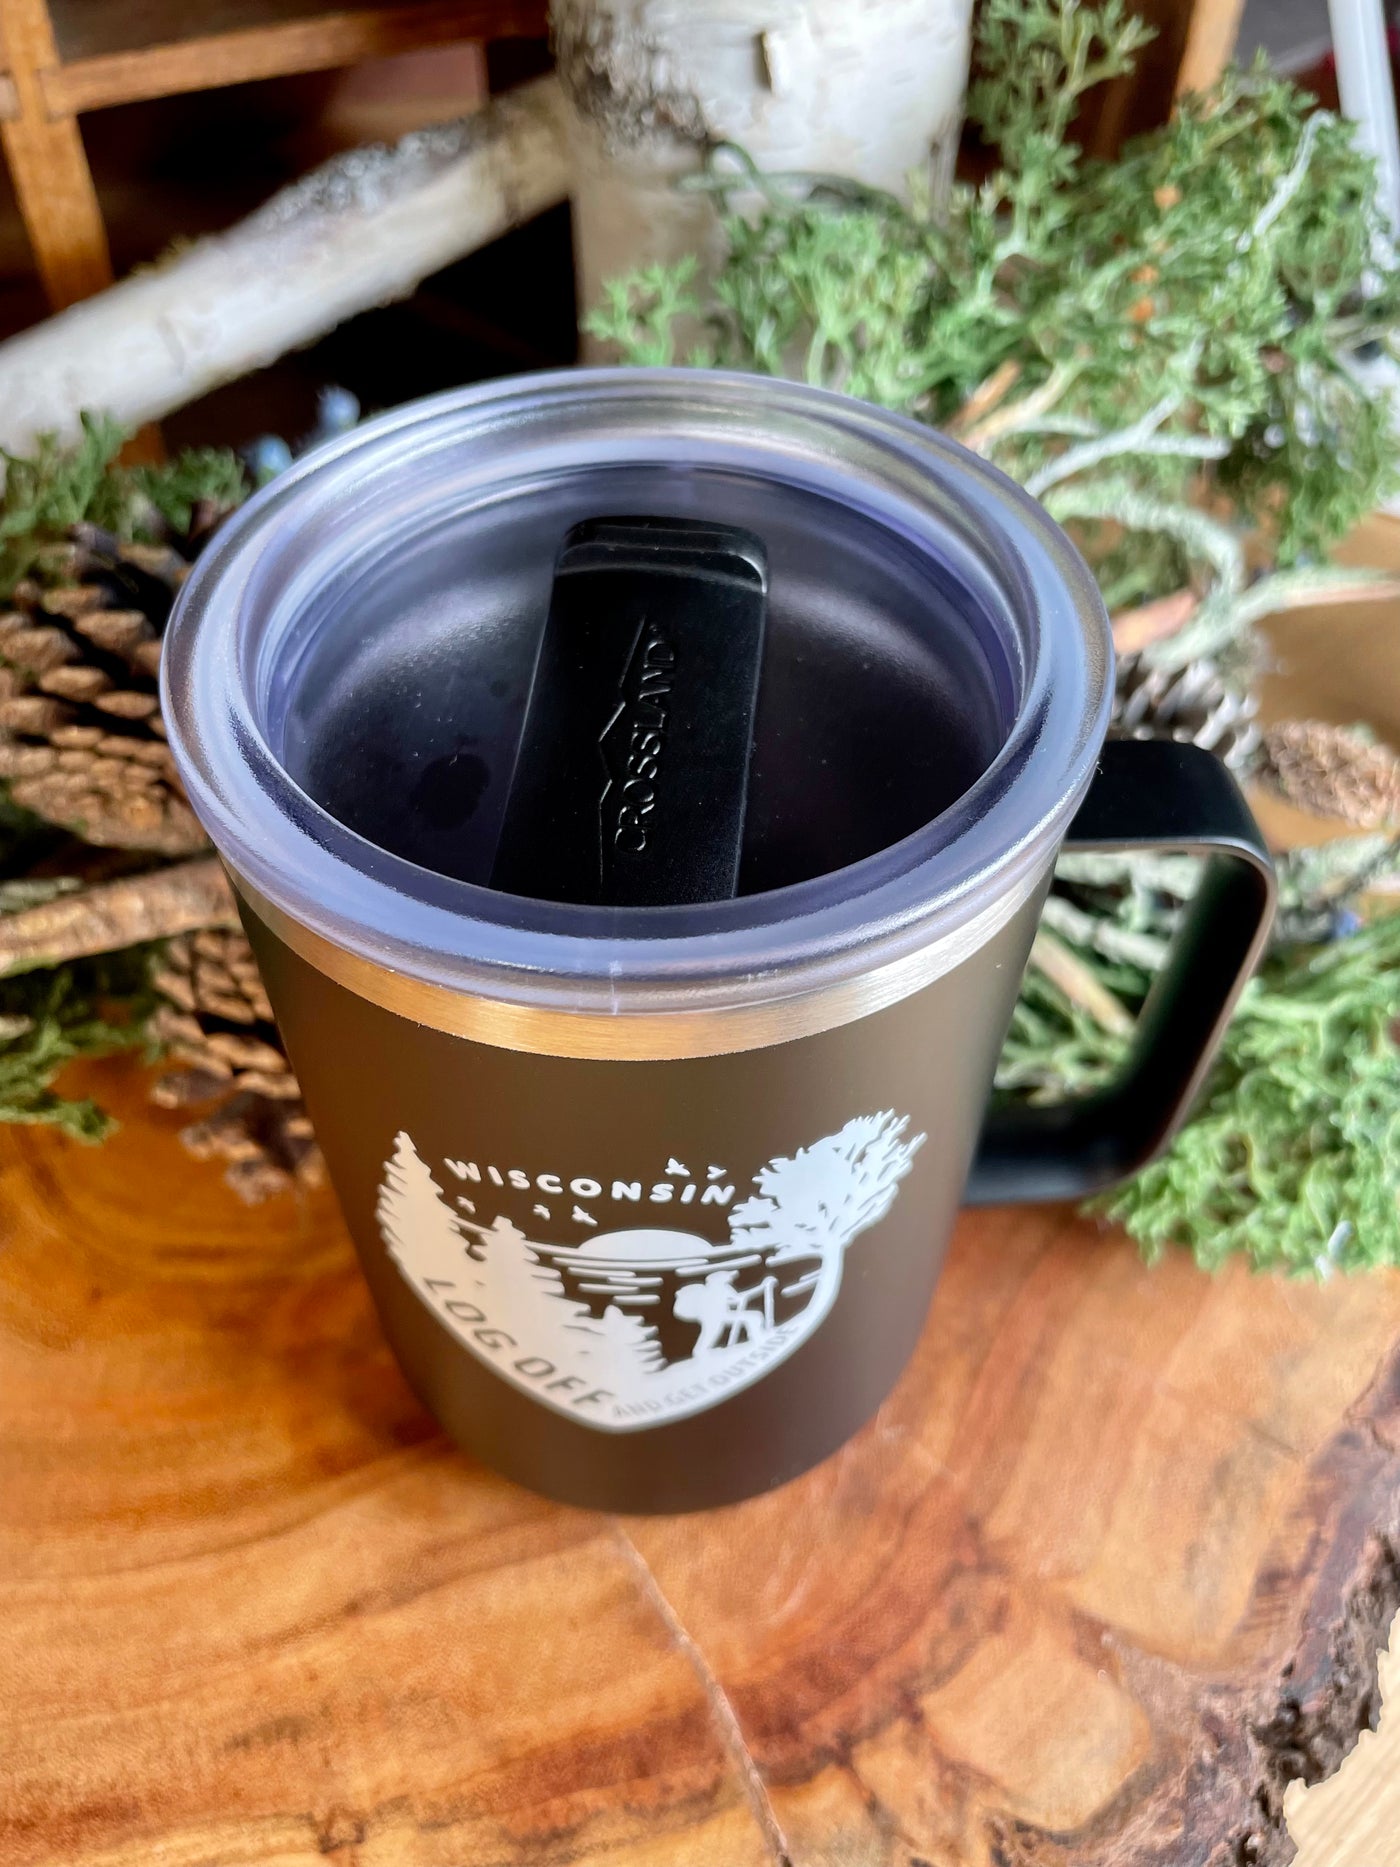 slide top design on insulated black tumbler with white log off Wisconsin design